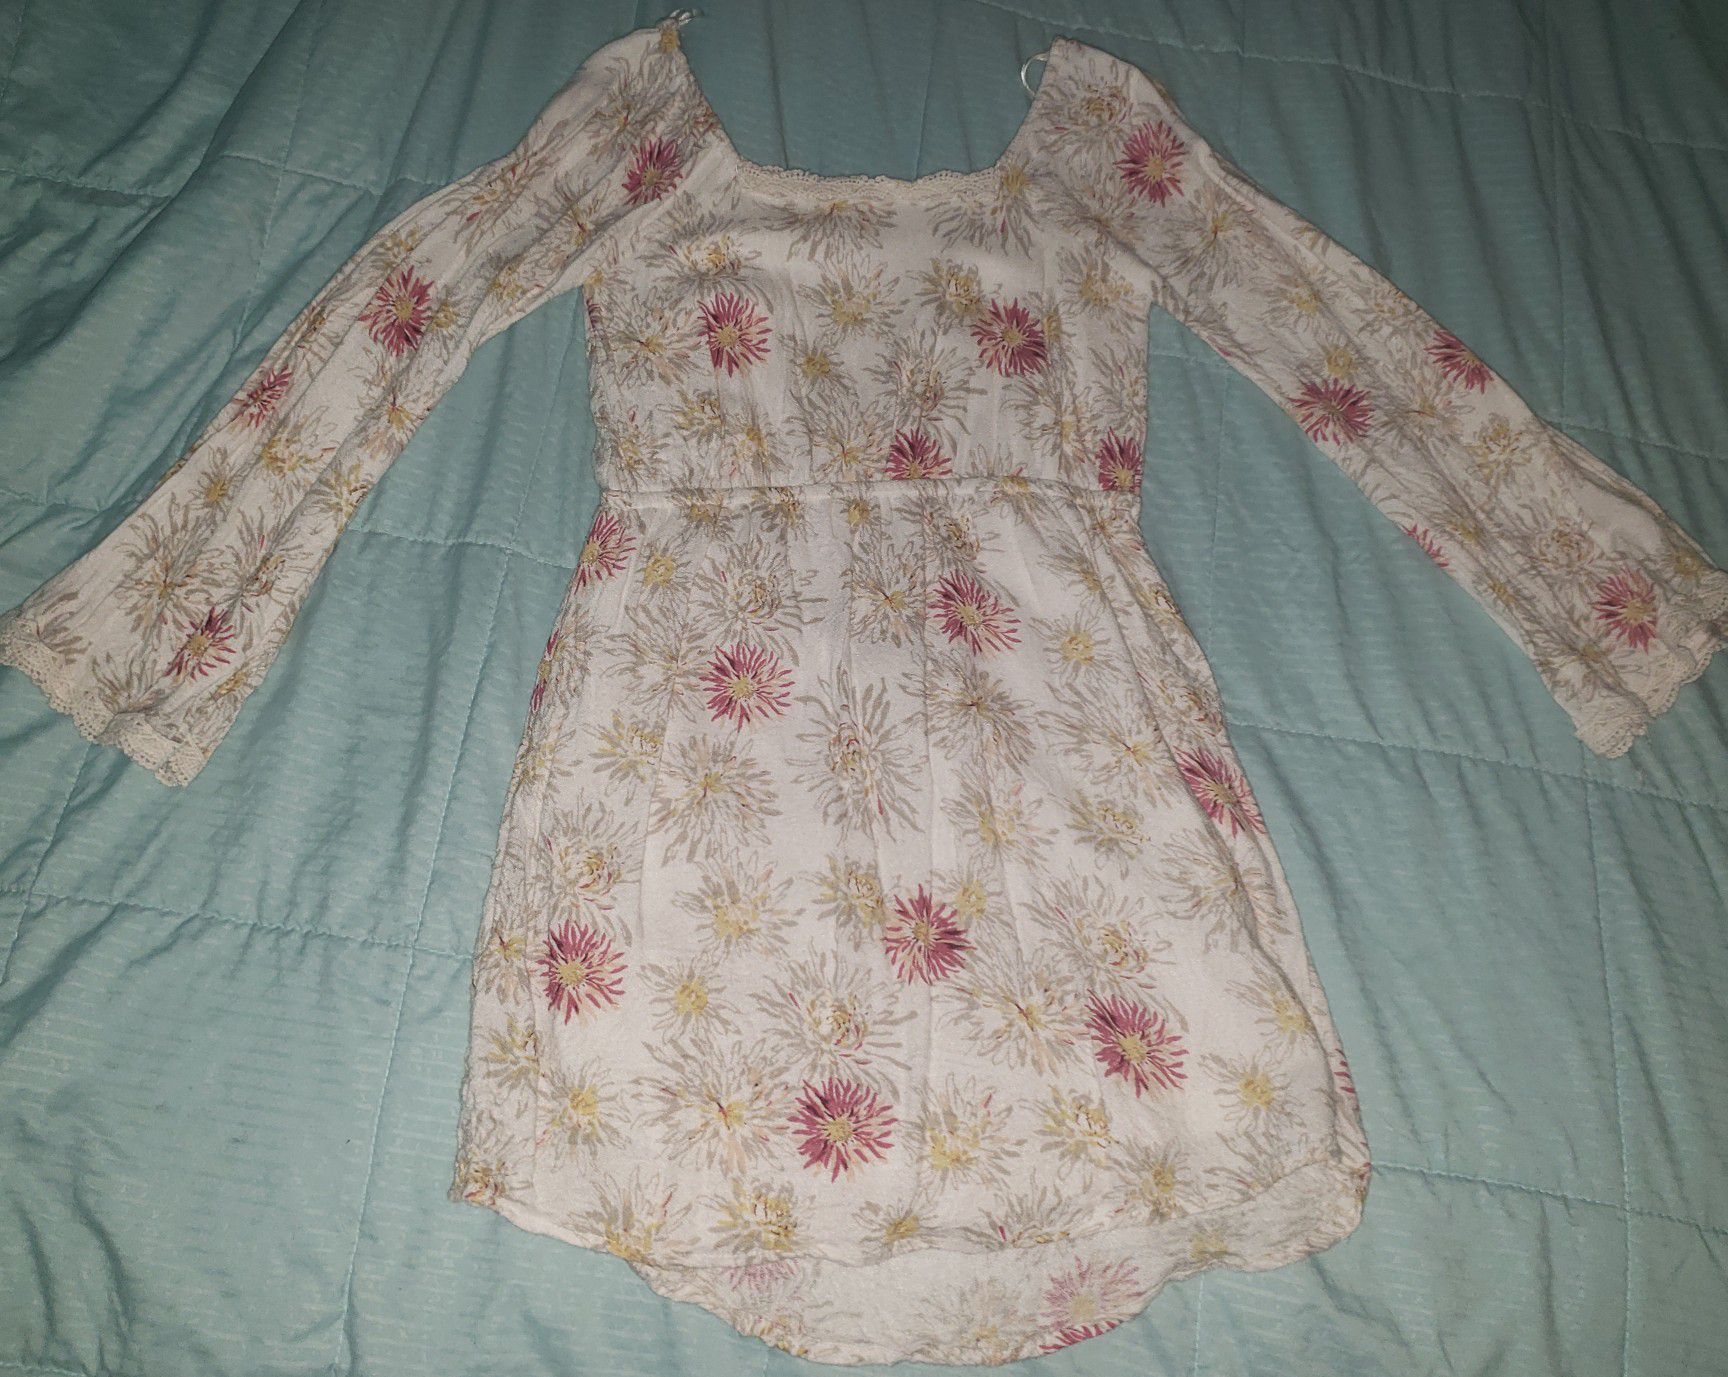 O'neill Girls Flower print Dress Size Small Boho Long sleeves with a little bit of a bell Ivory with pink, tan and yellow wildflowers